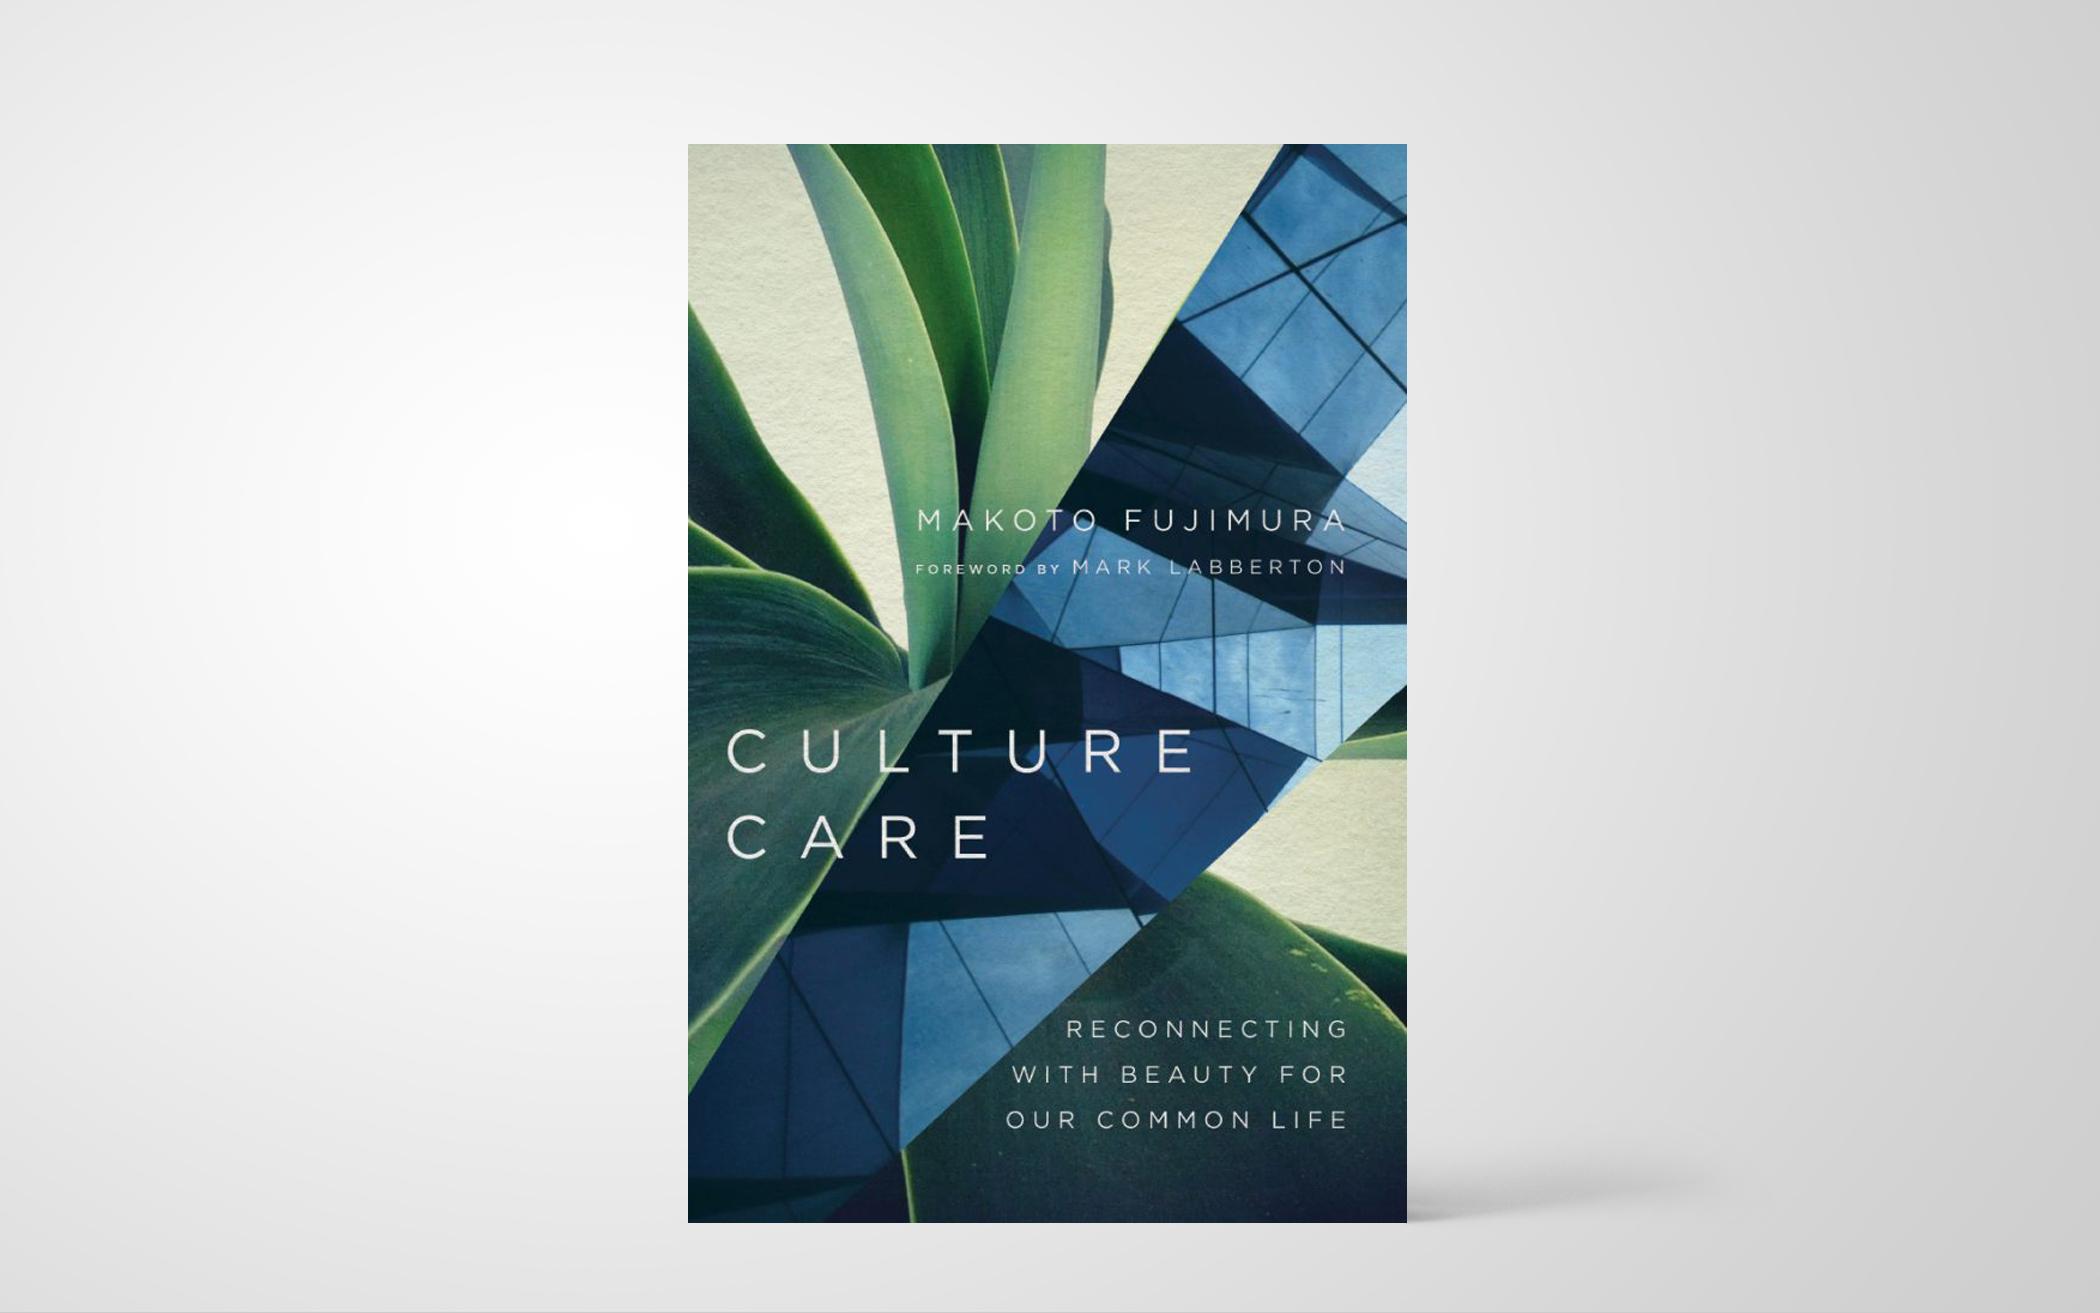 Culture Care: Reconnecting with Beauty for Our Common Life